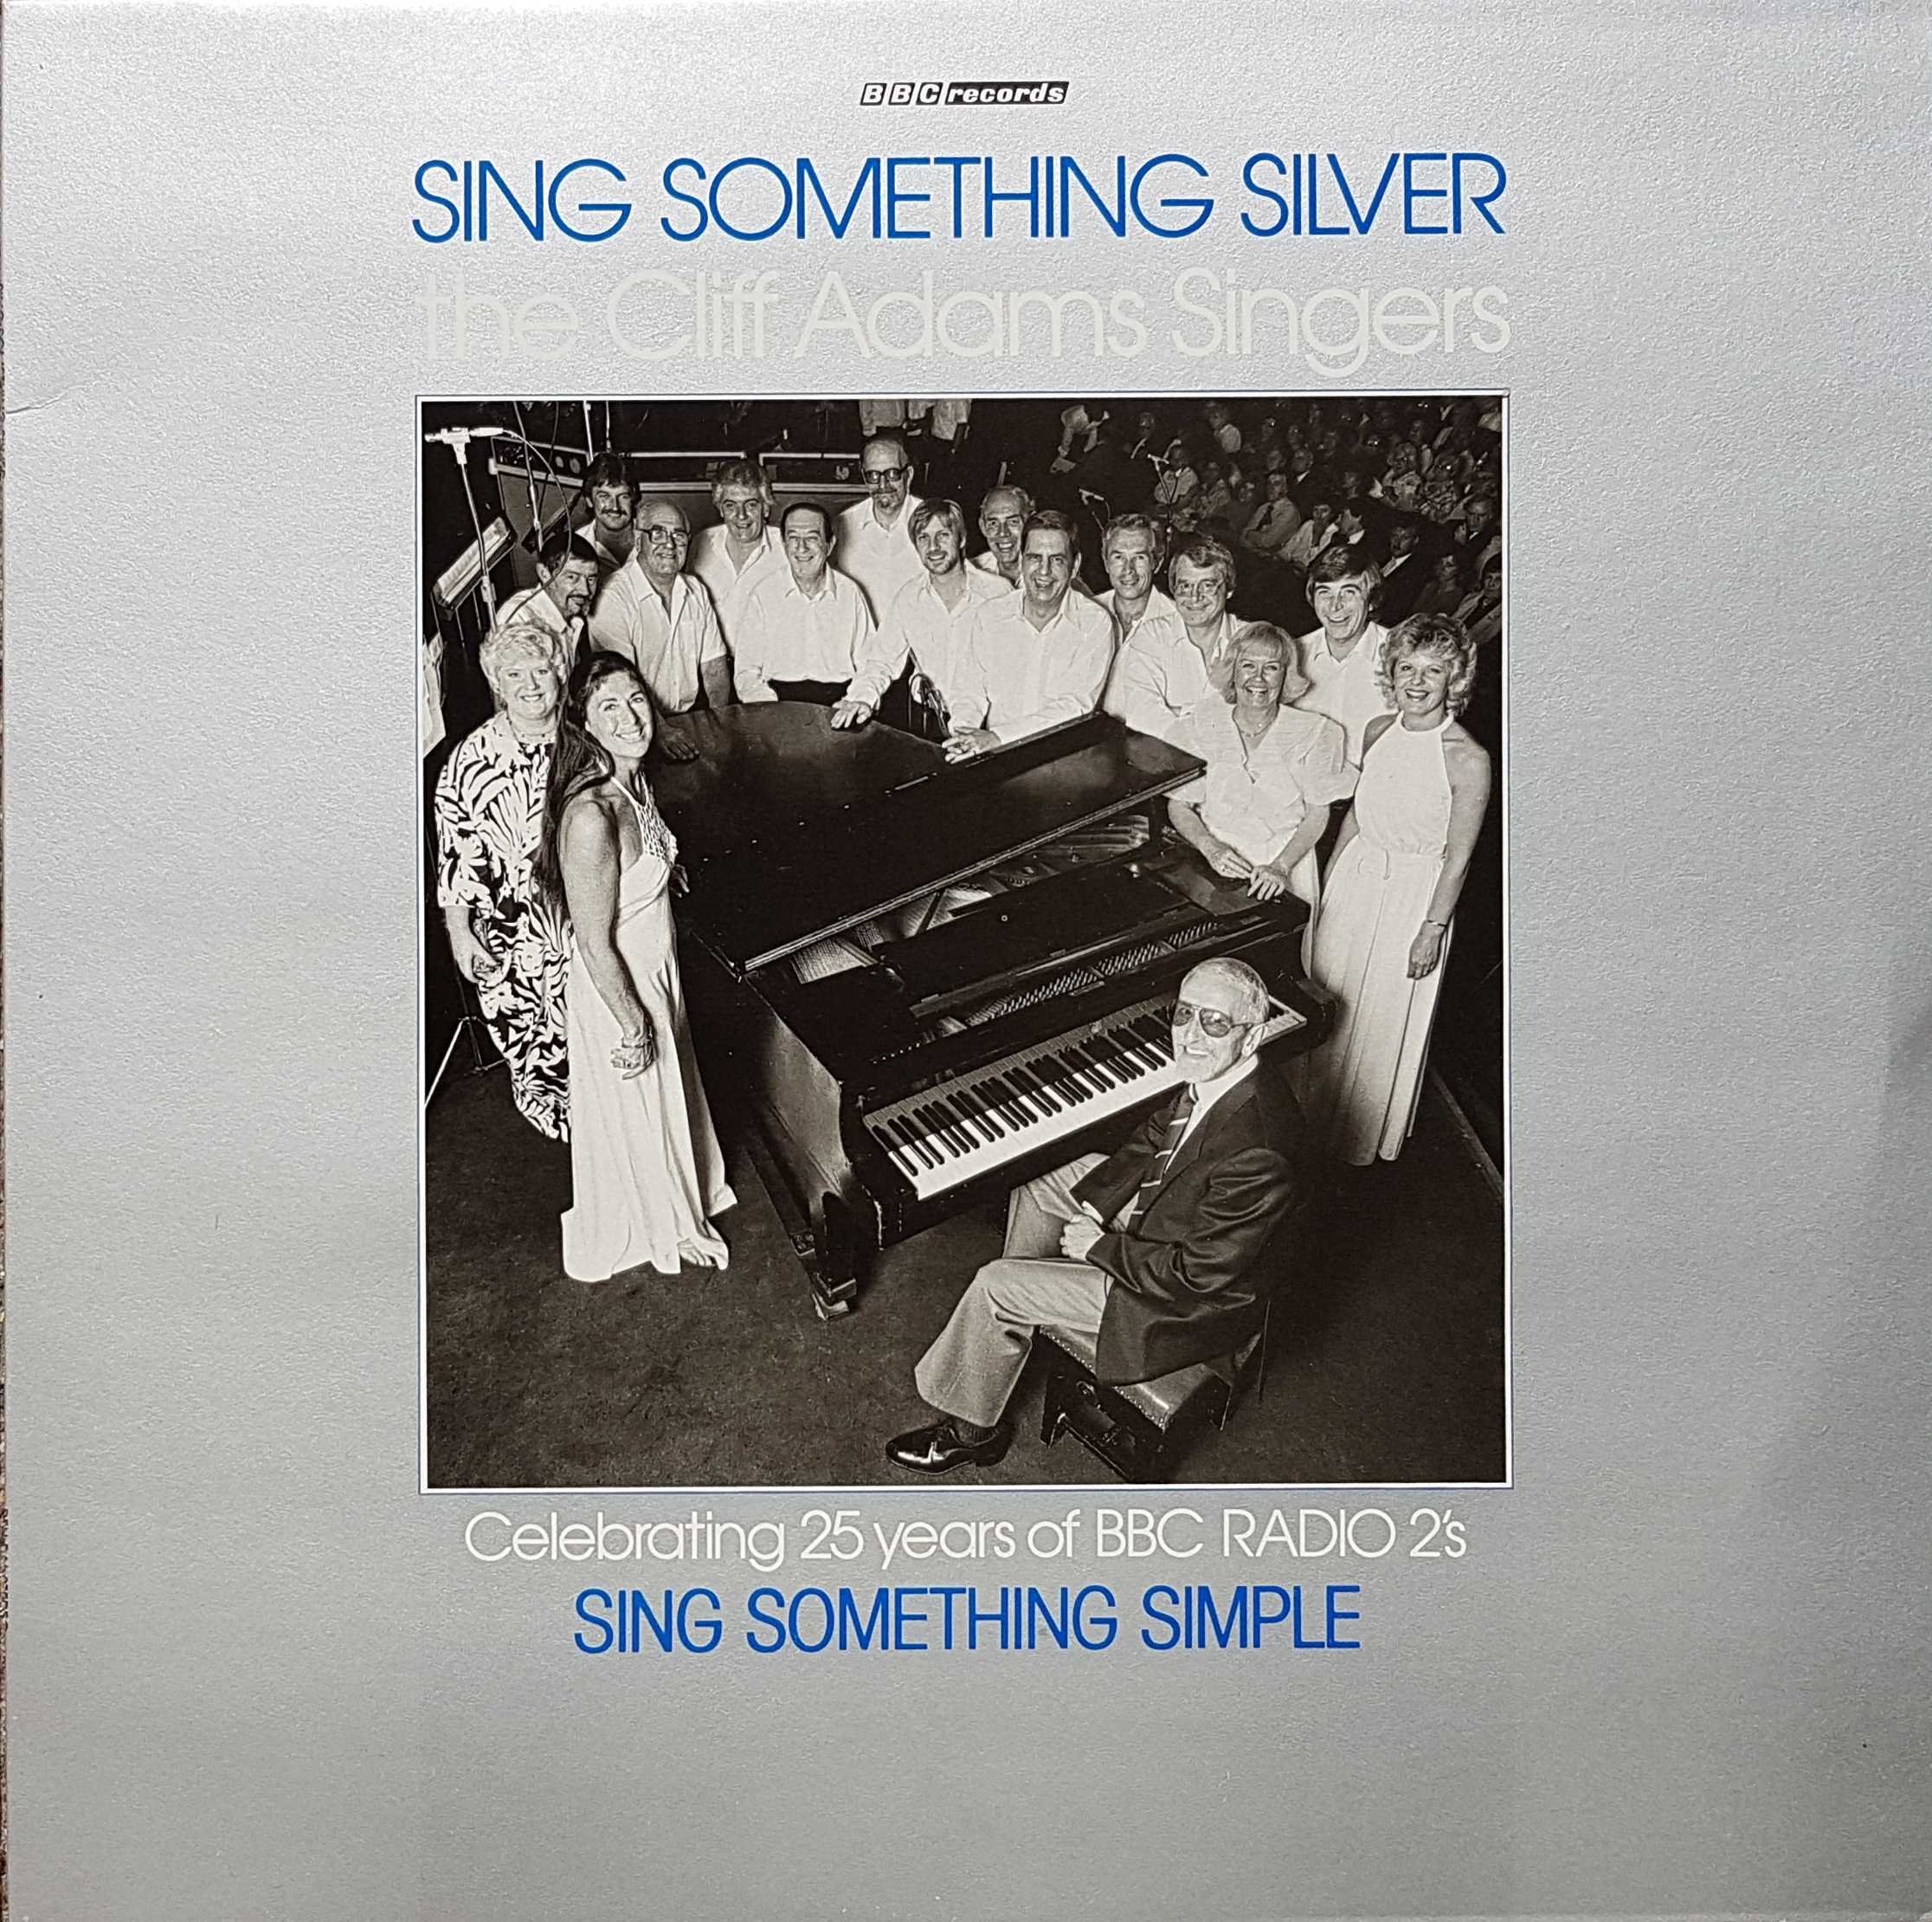 Picture of REH 546 Sing something silver by artist Various from the BBC albums - Records and Tapes library